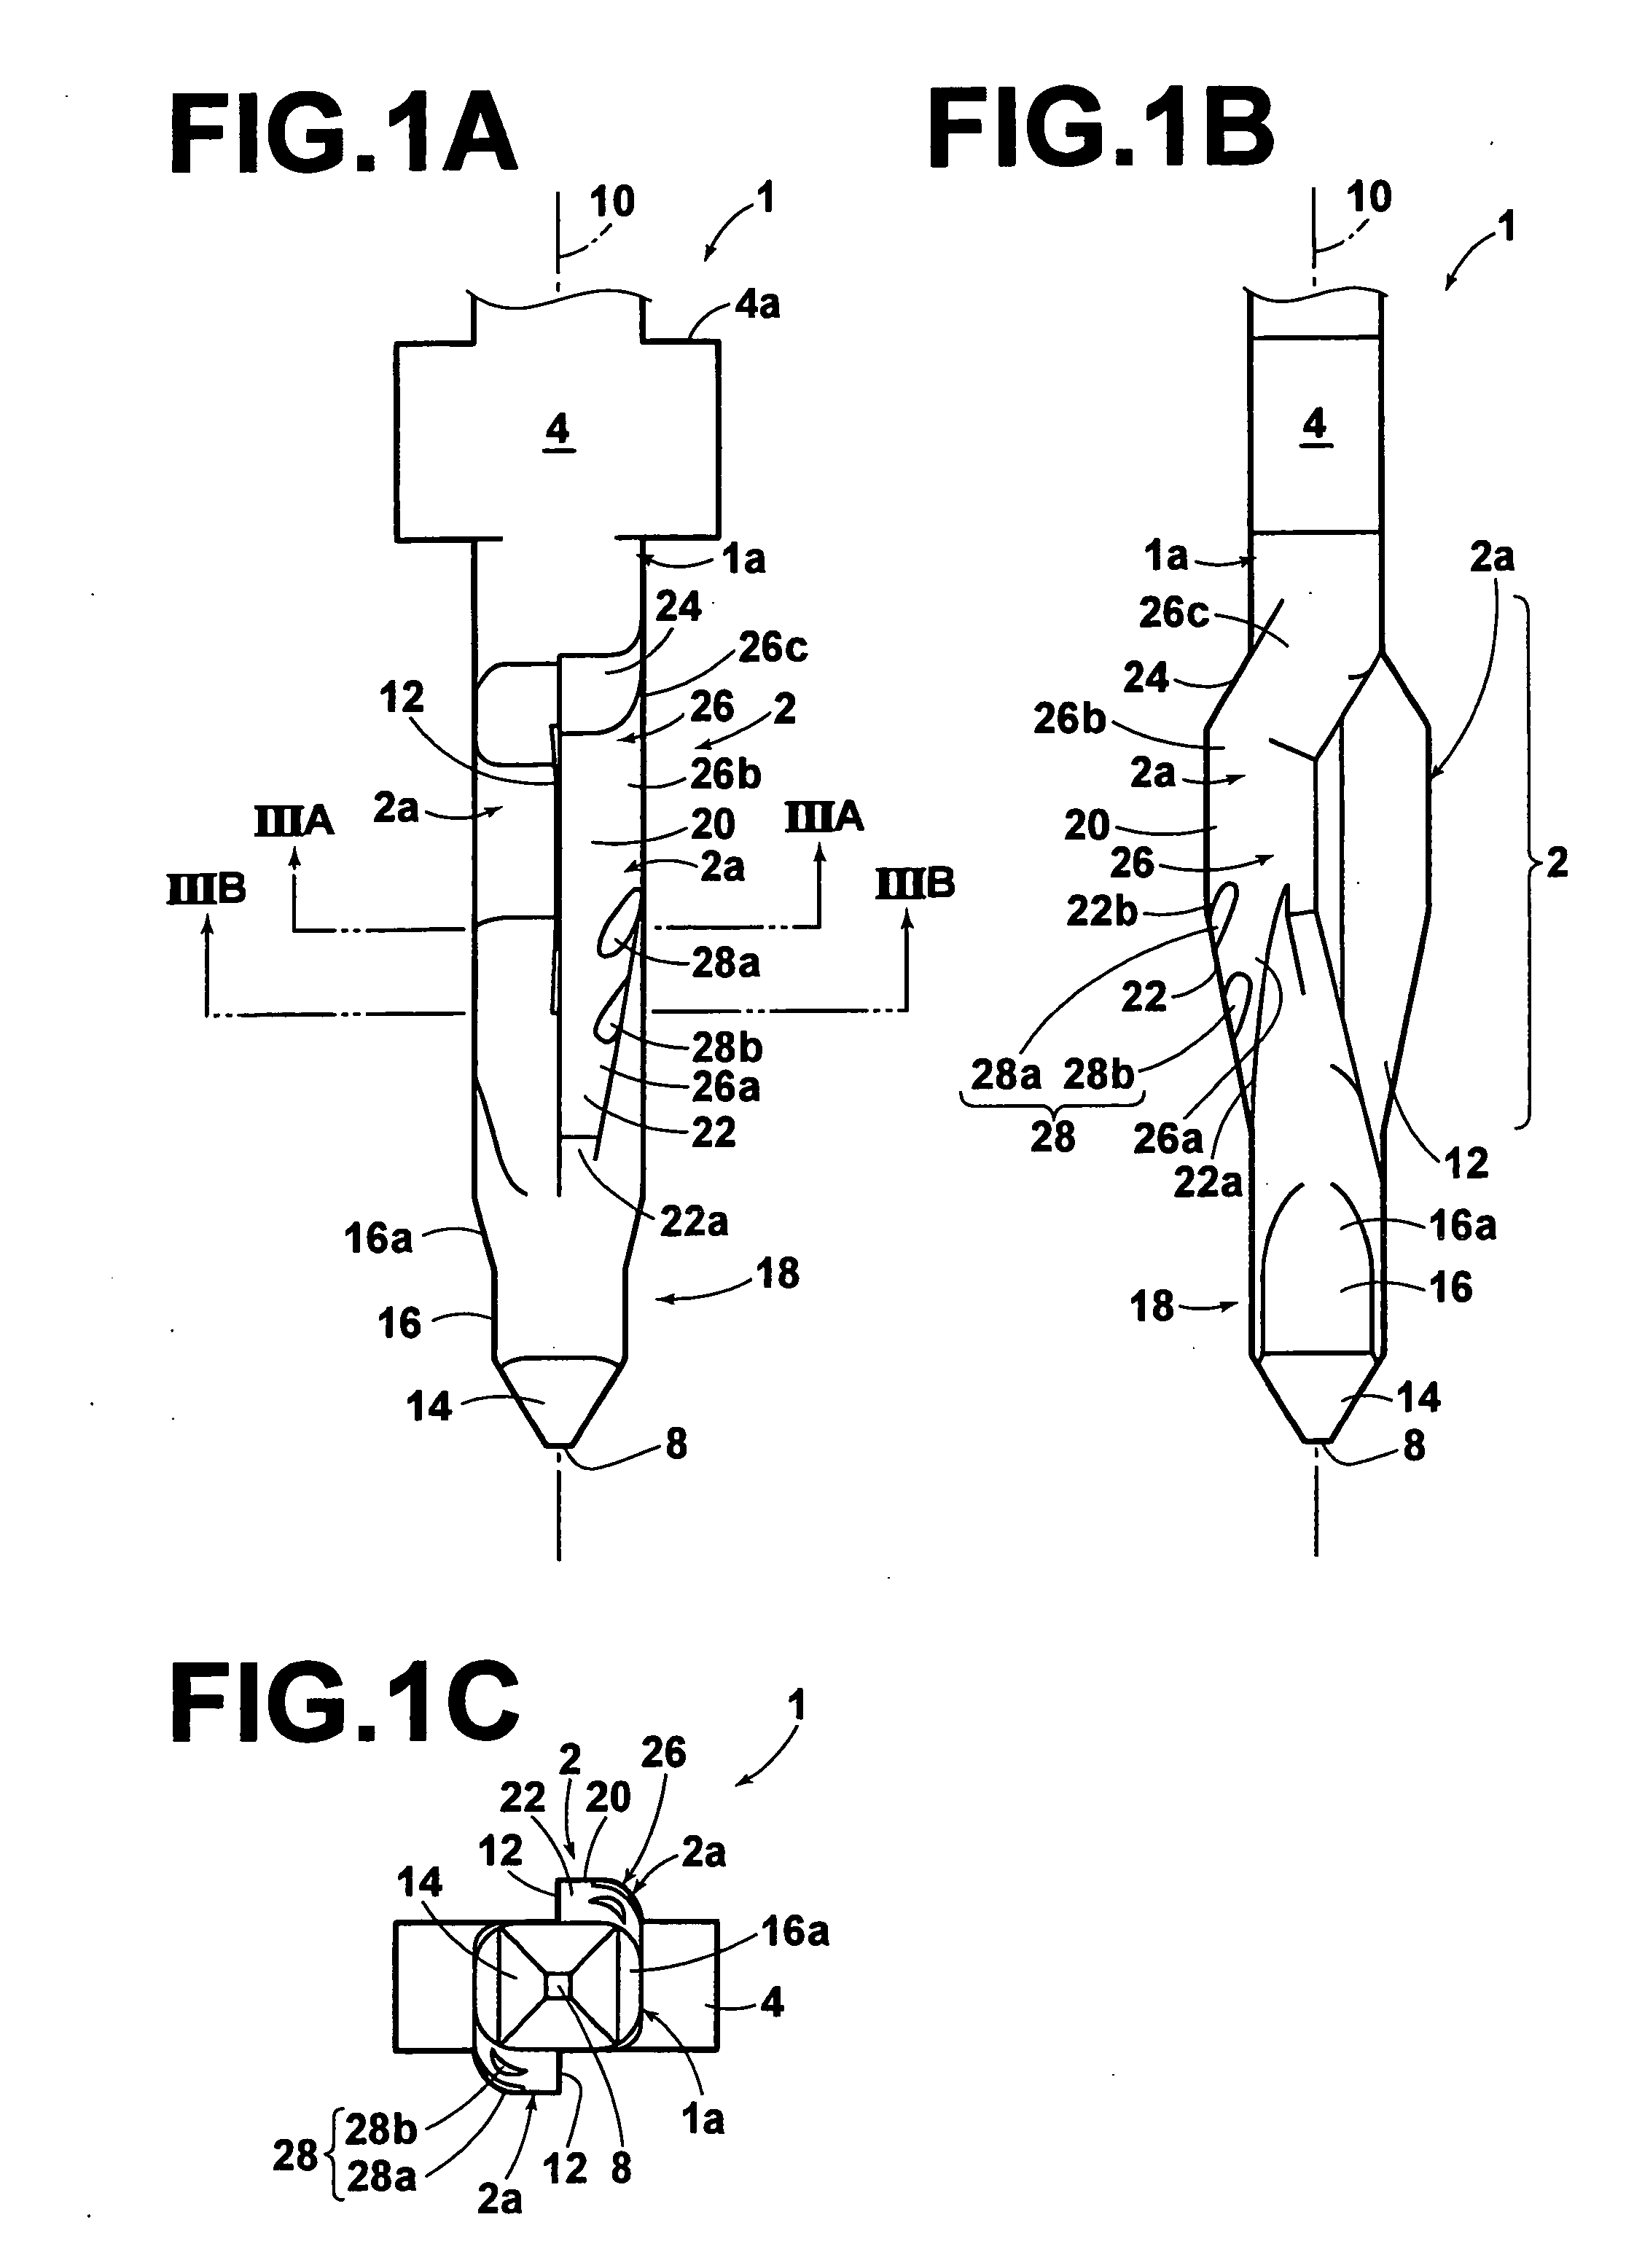 Compliant pin and electrical connector utilizing compliant pin